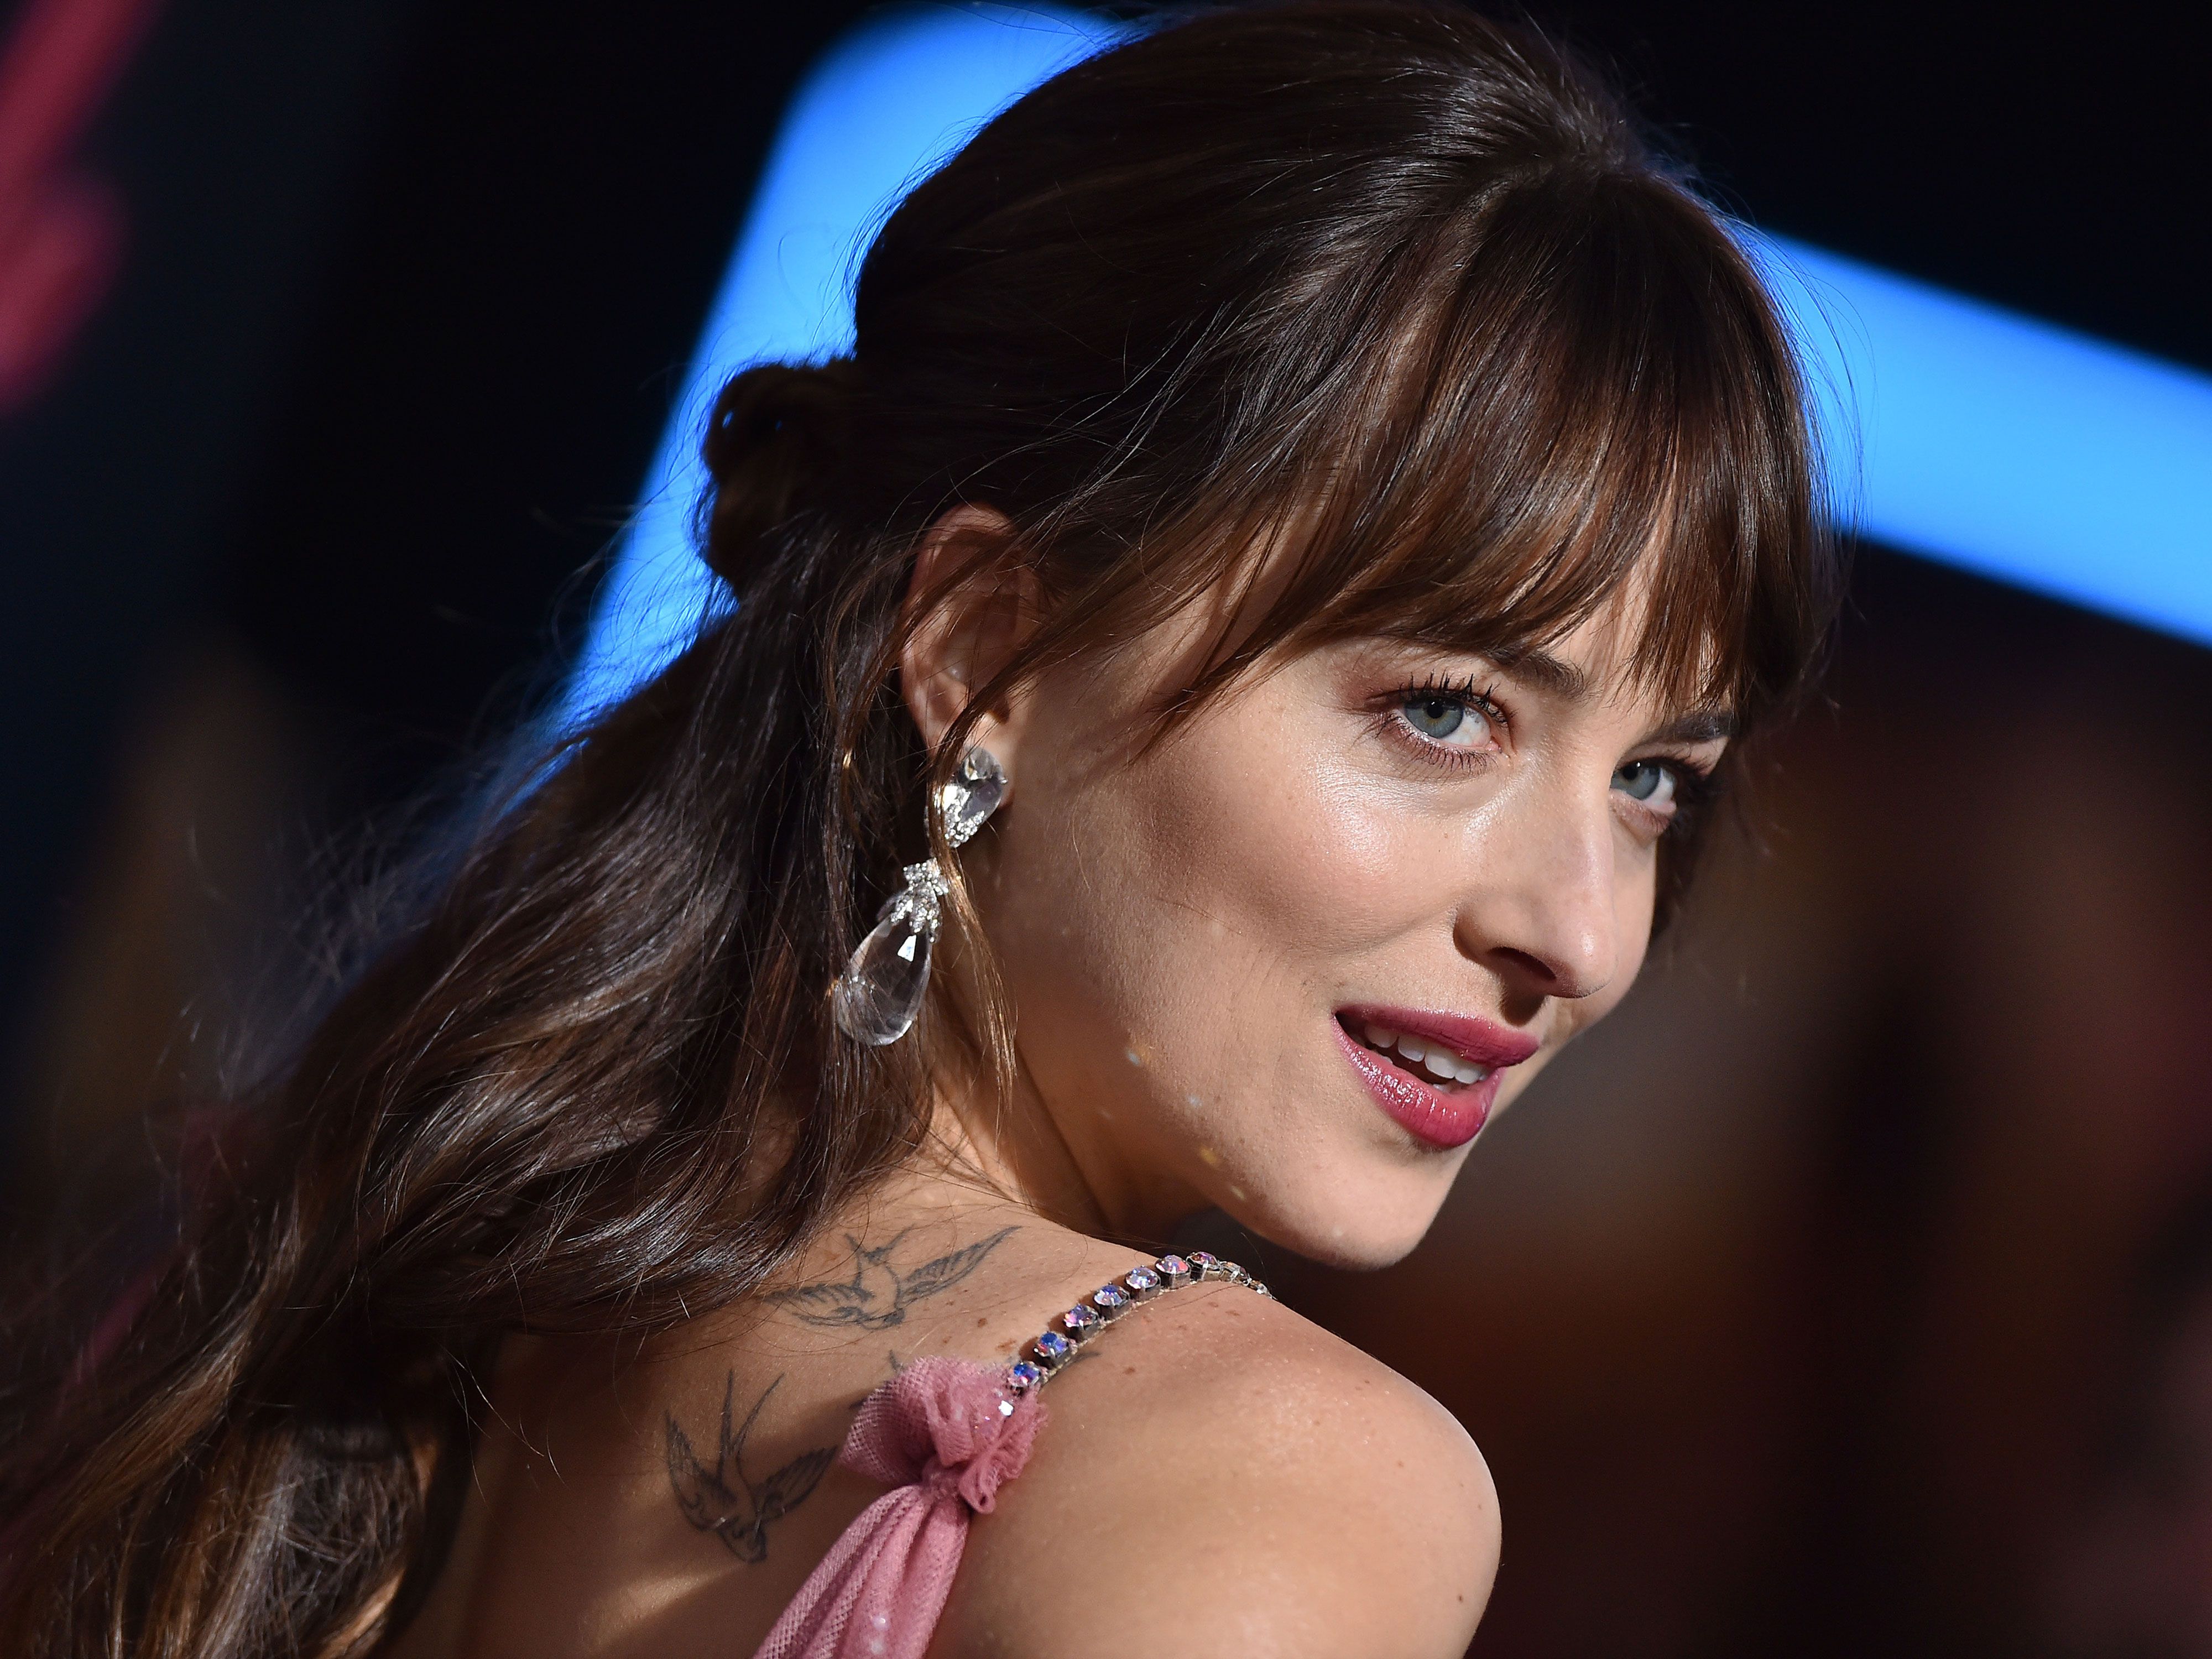 Dakota Johnson had a princess moment in a pink Gucci gown this weekend